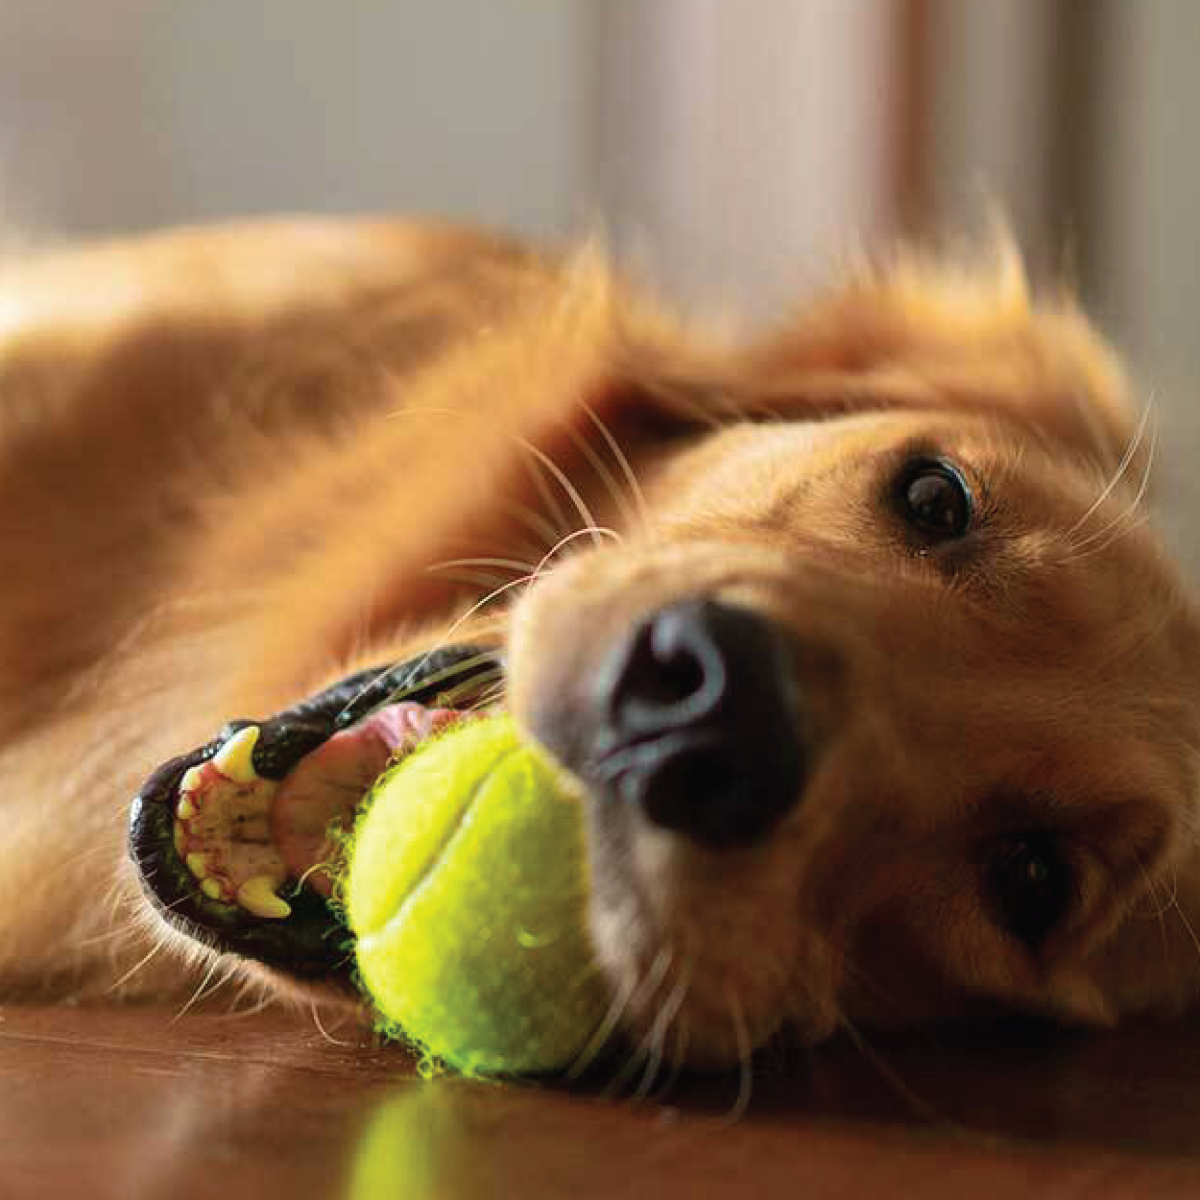 Dog laying on floor with tennis ball in mouth